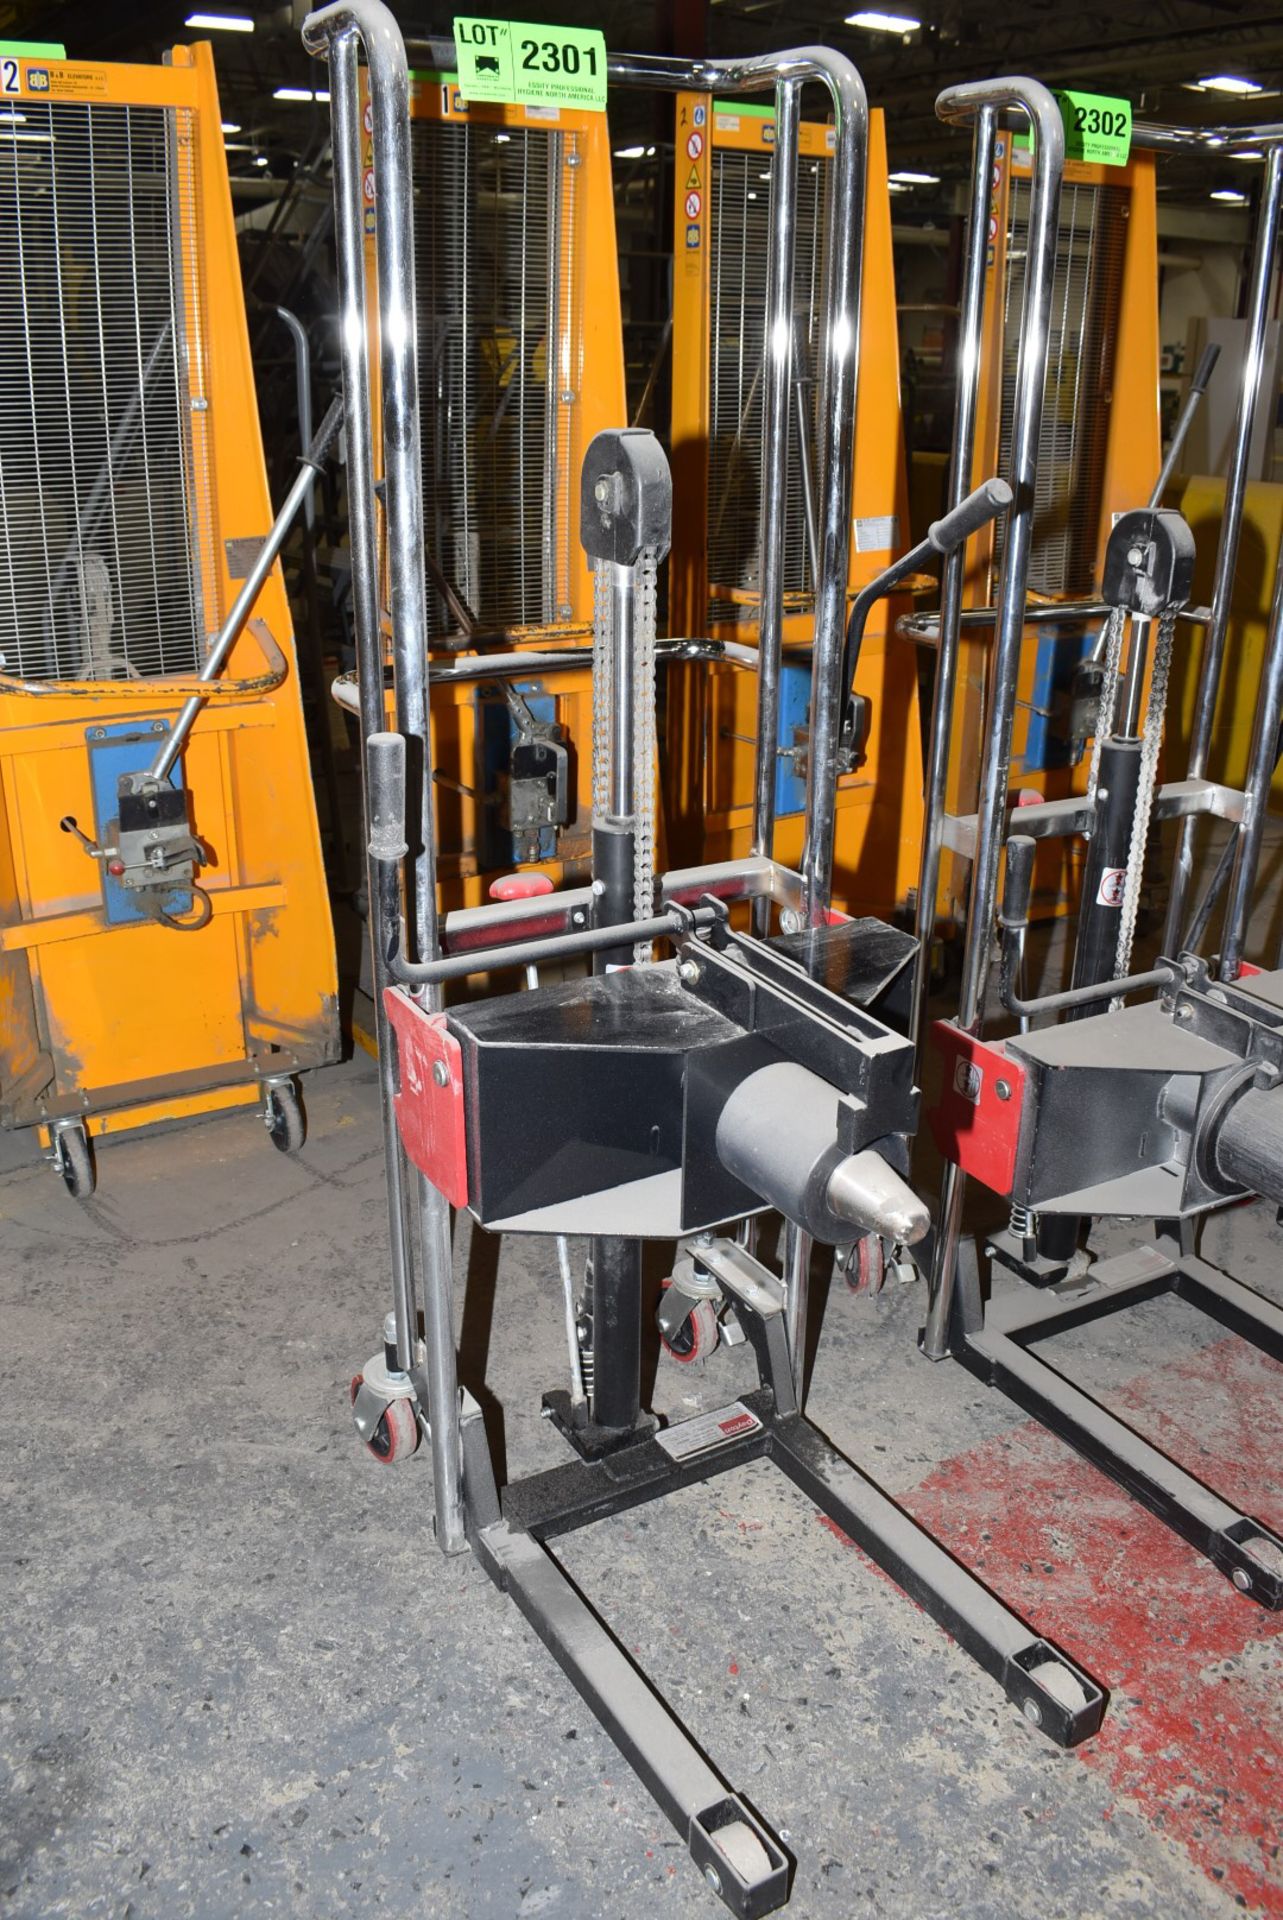 DAYTON 4ECW7 880 LB. CAPACITY SHAFT EXTRACTOR MANUAL LIFT TRUCK, S/N: N/A [RIGGING FEES FOR LOT #